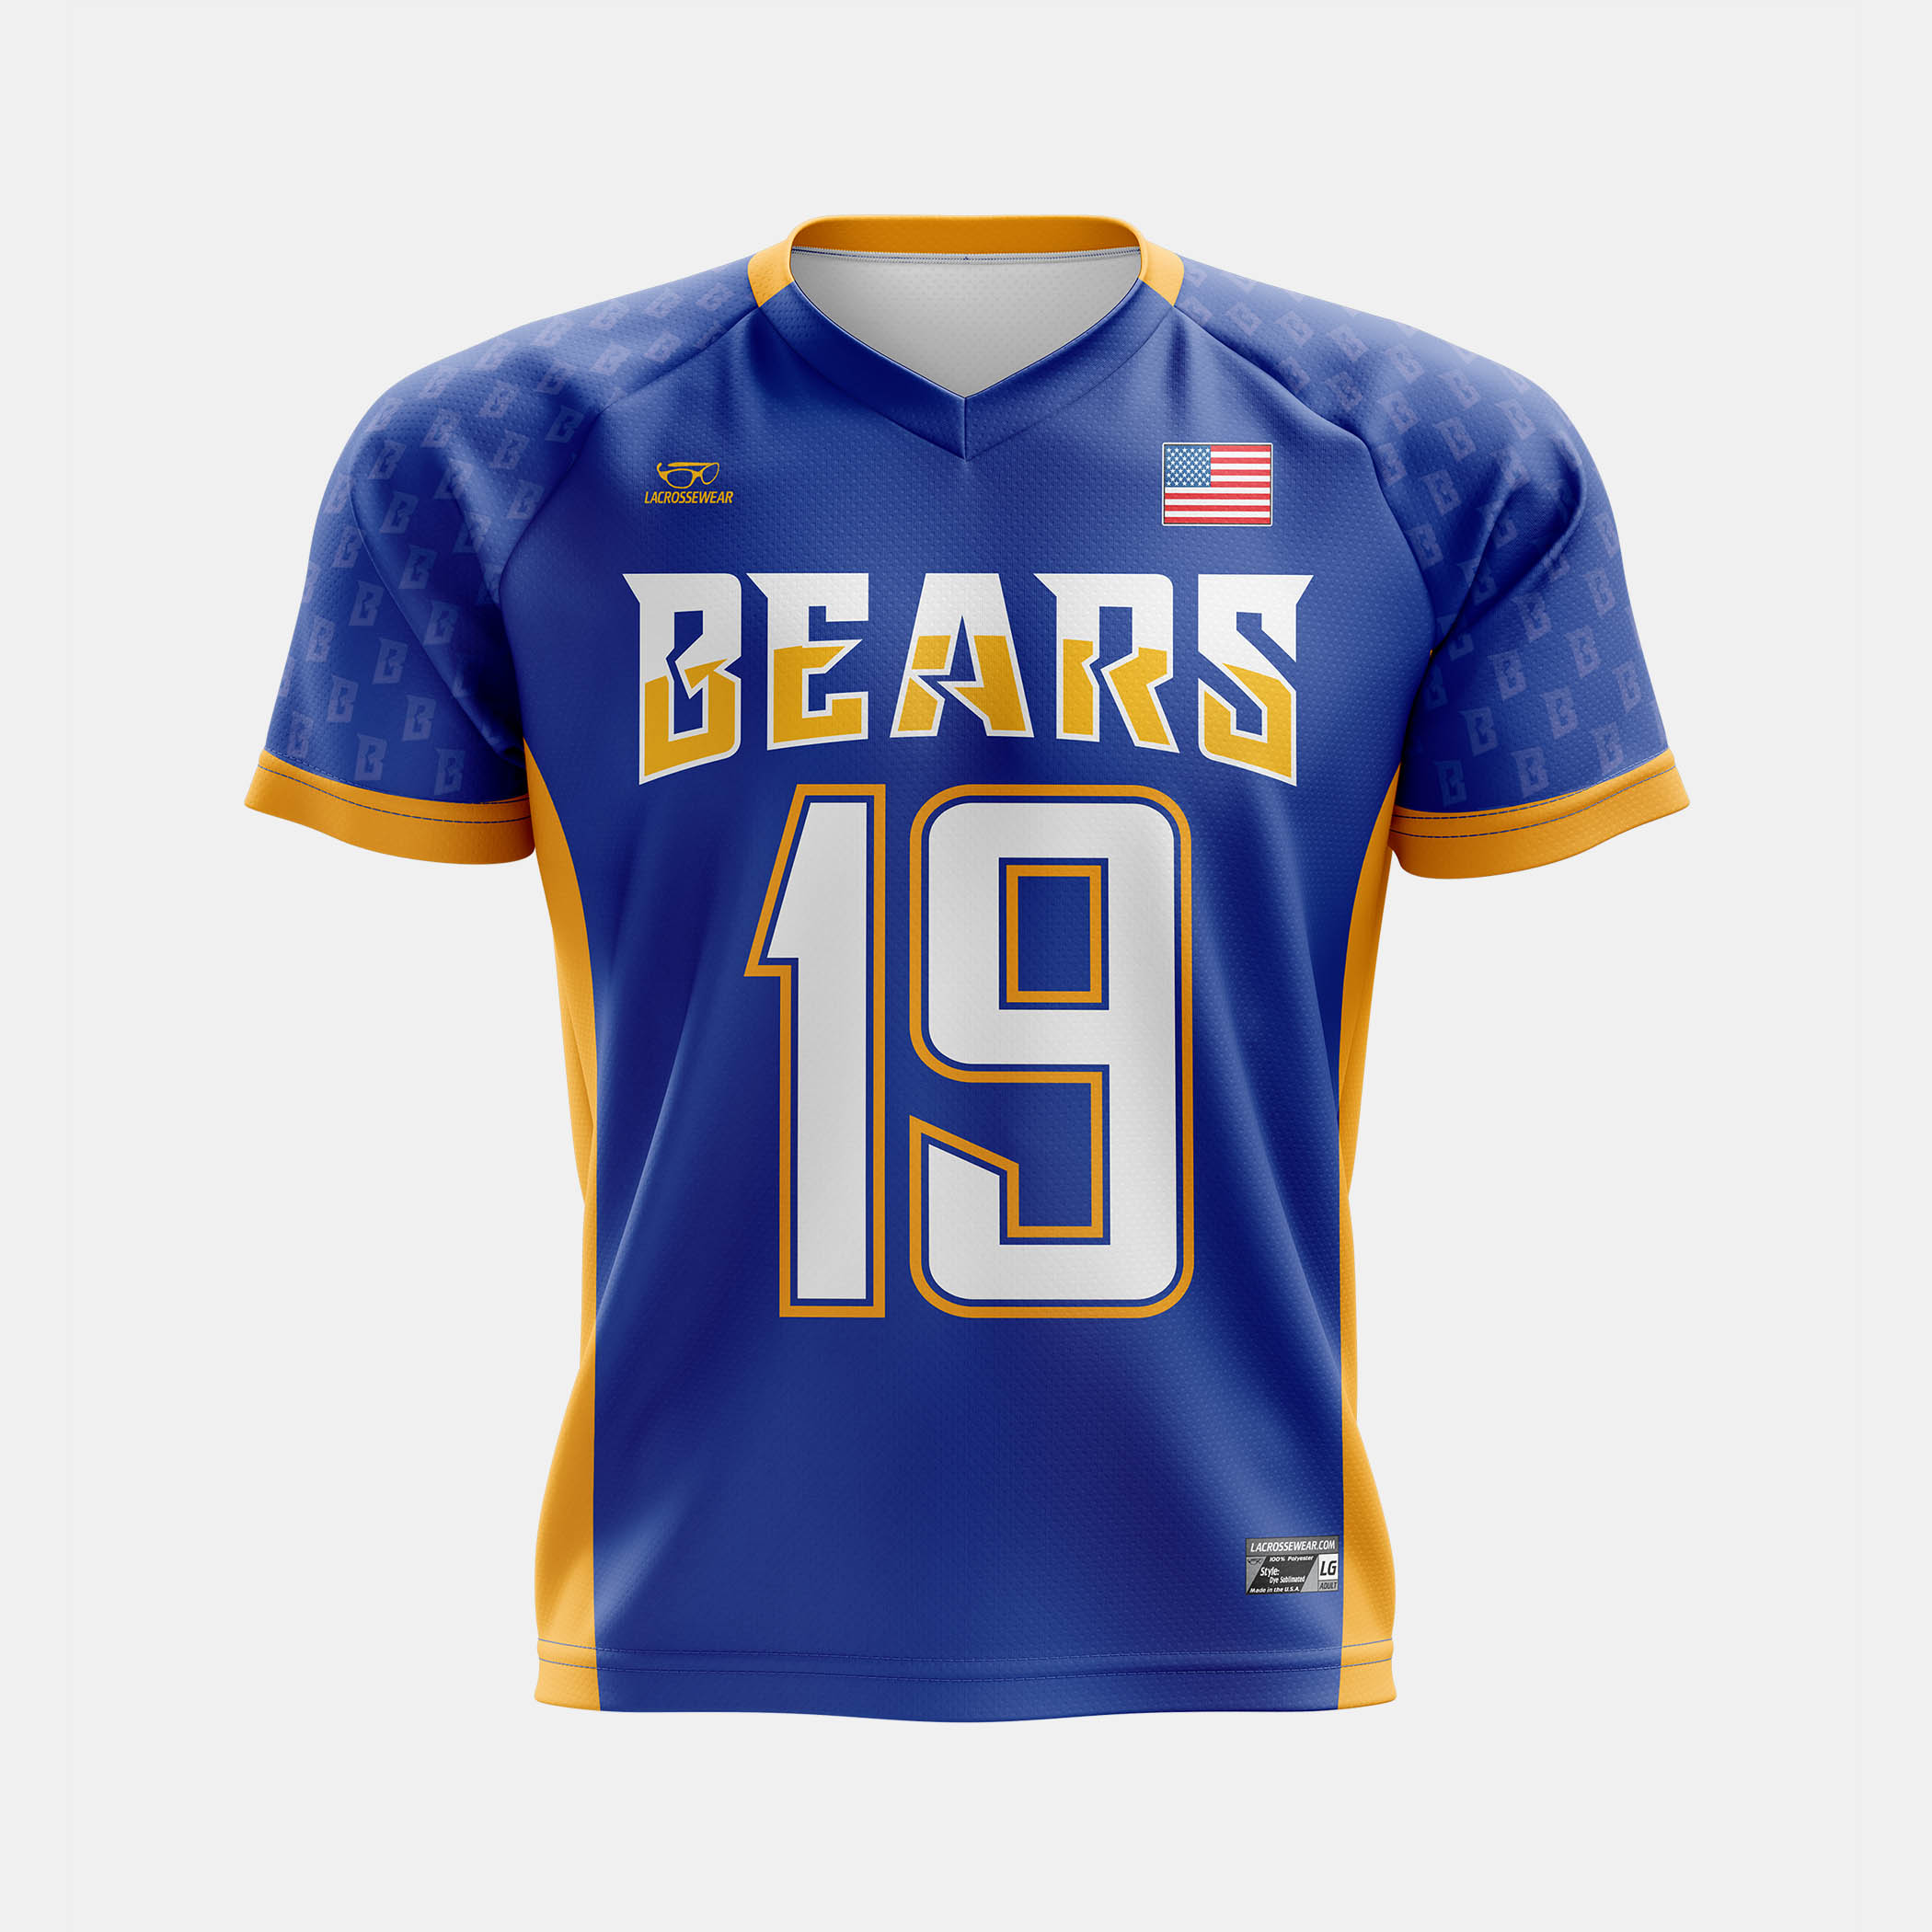 Bears Lax Jersey Mock Front View